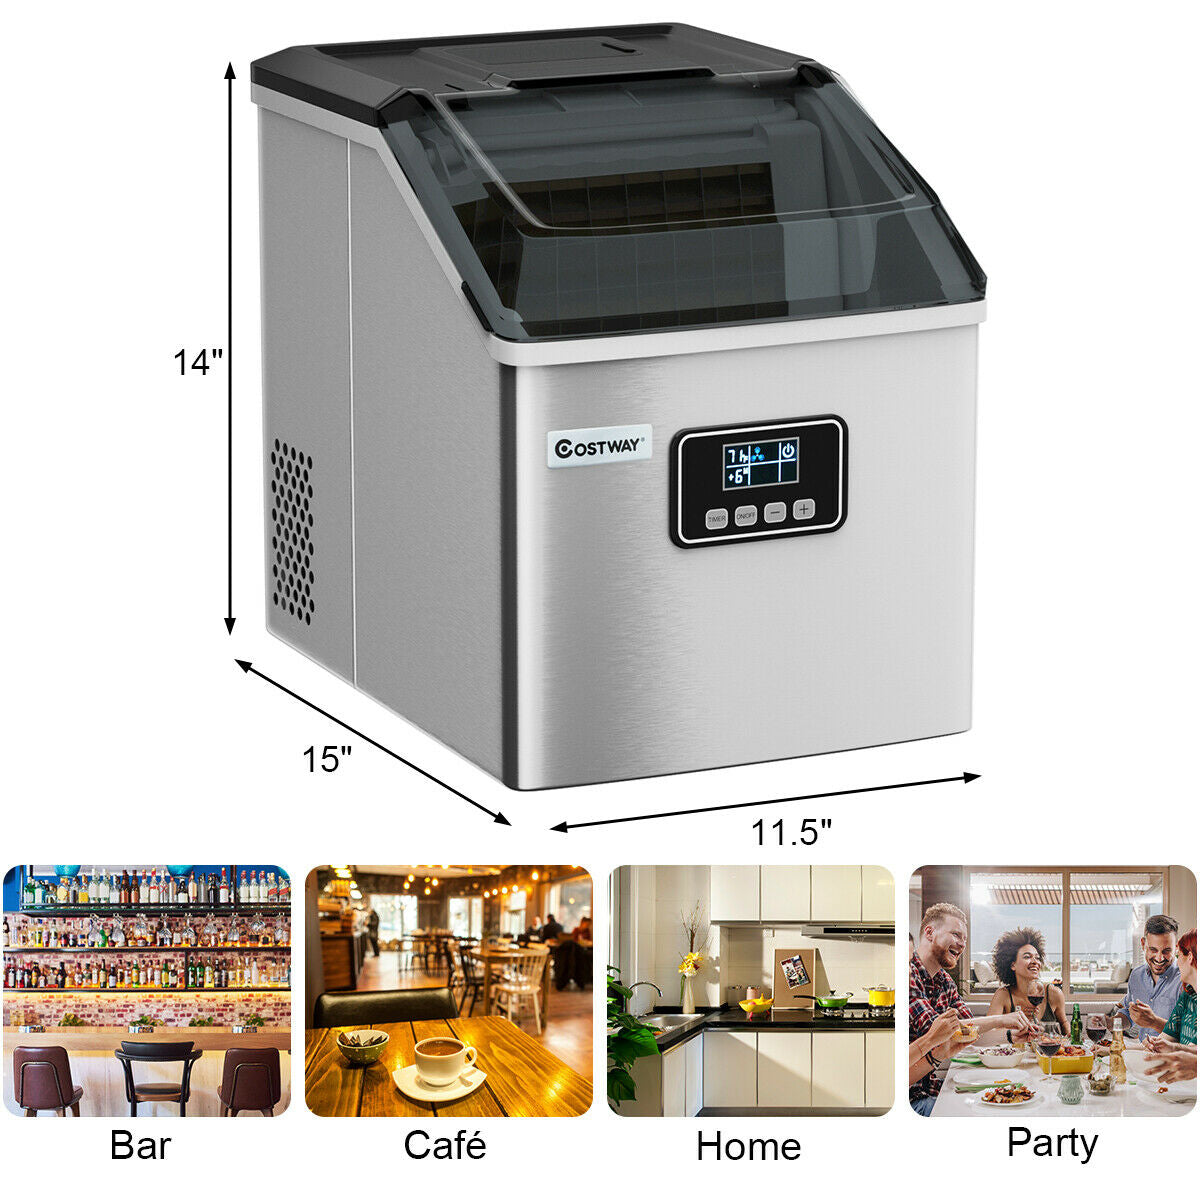 Hikidspace 48 Lbs Stainless Self-Clean Ice Maker with LCD Display